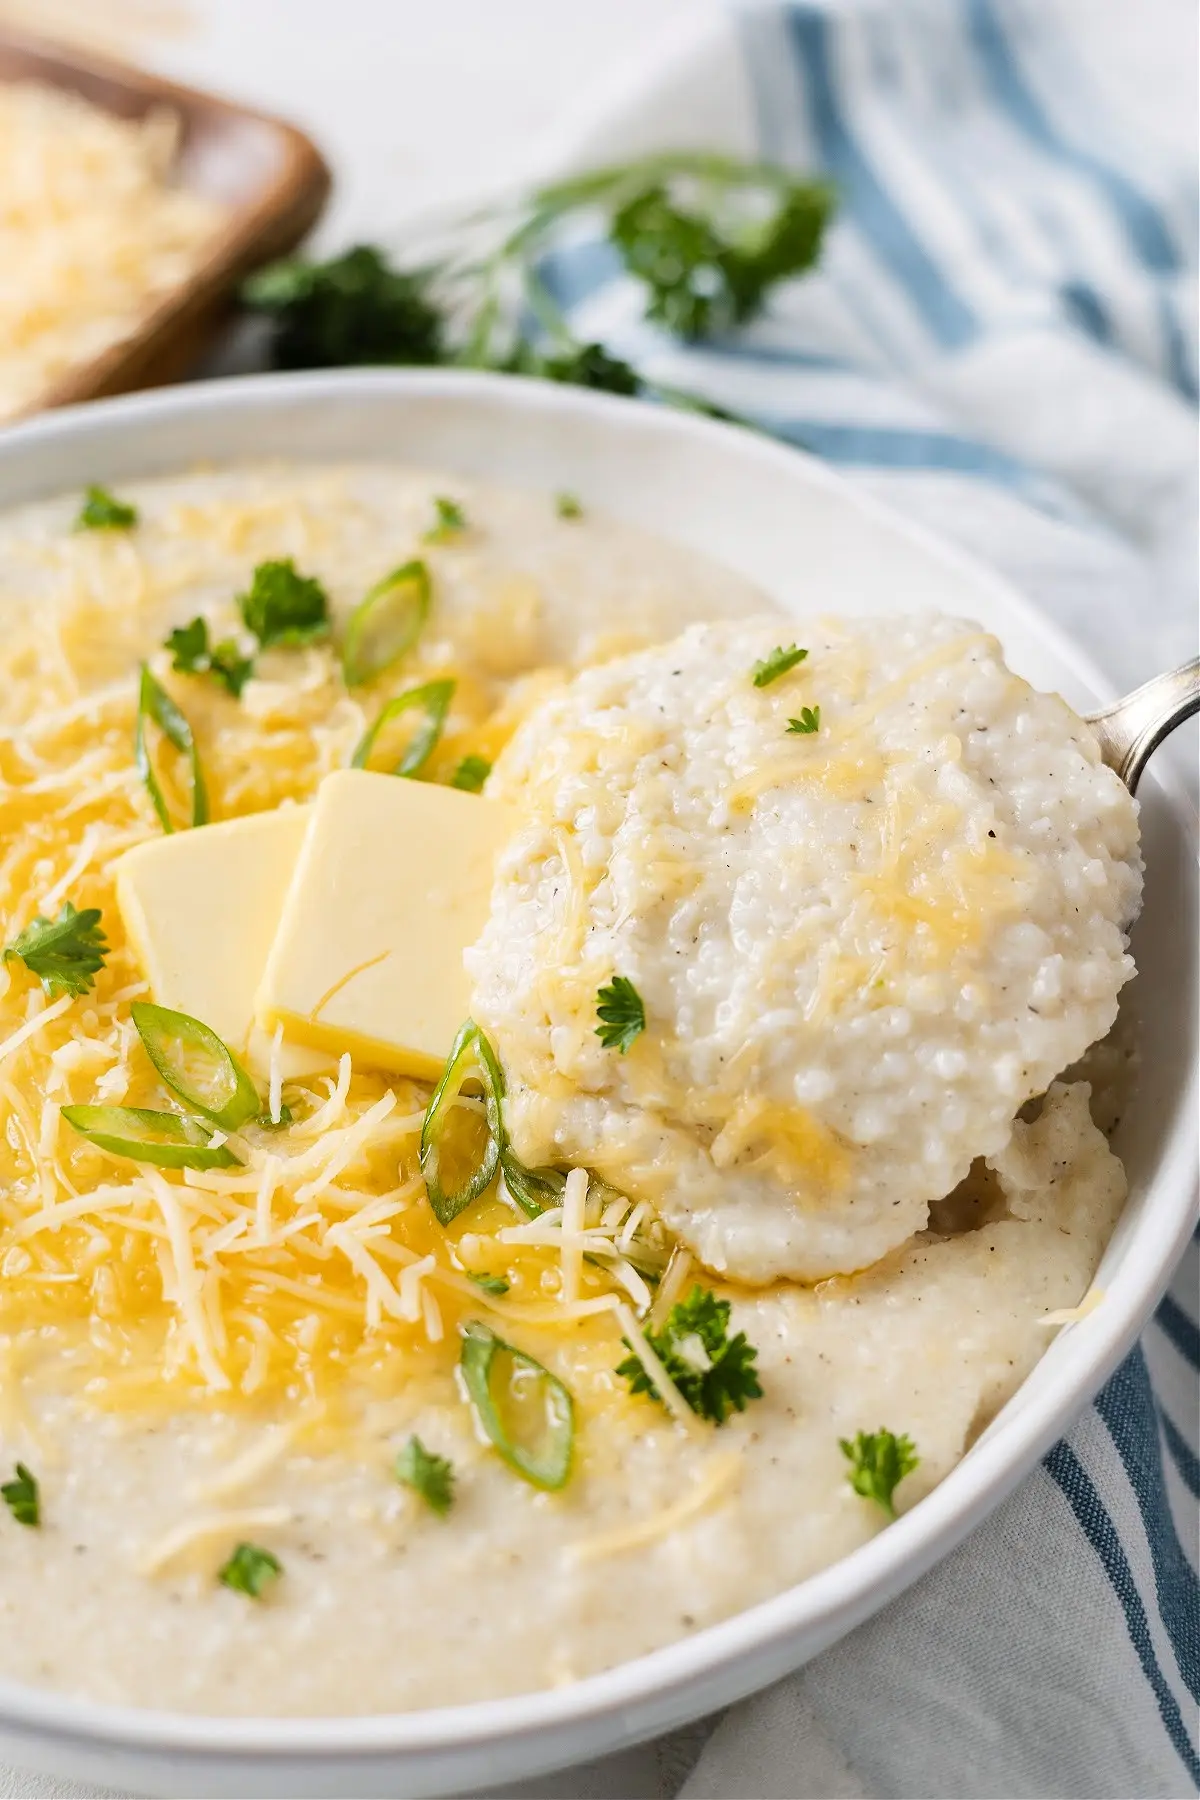 smoked gouda grits - What goes well with Smoked Gouda